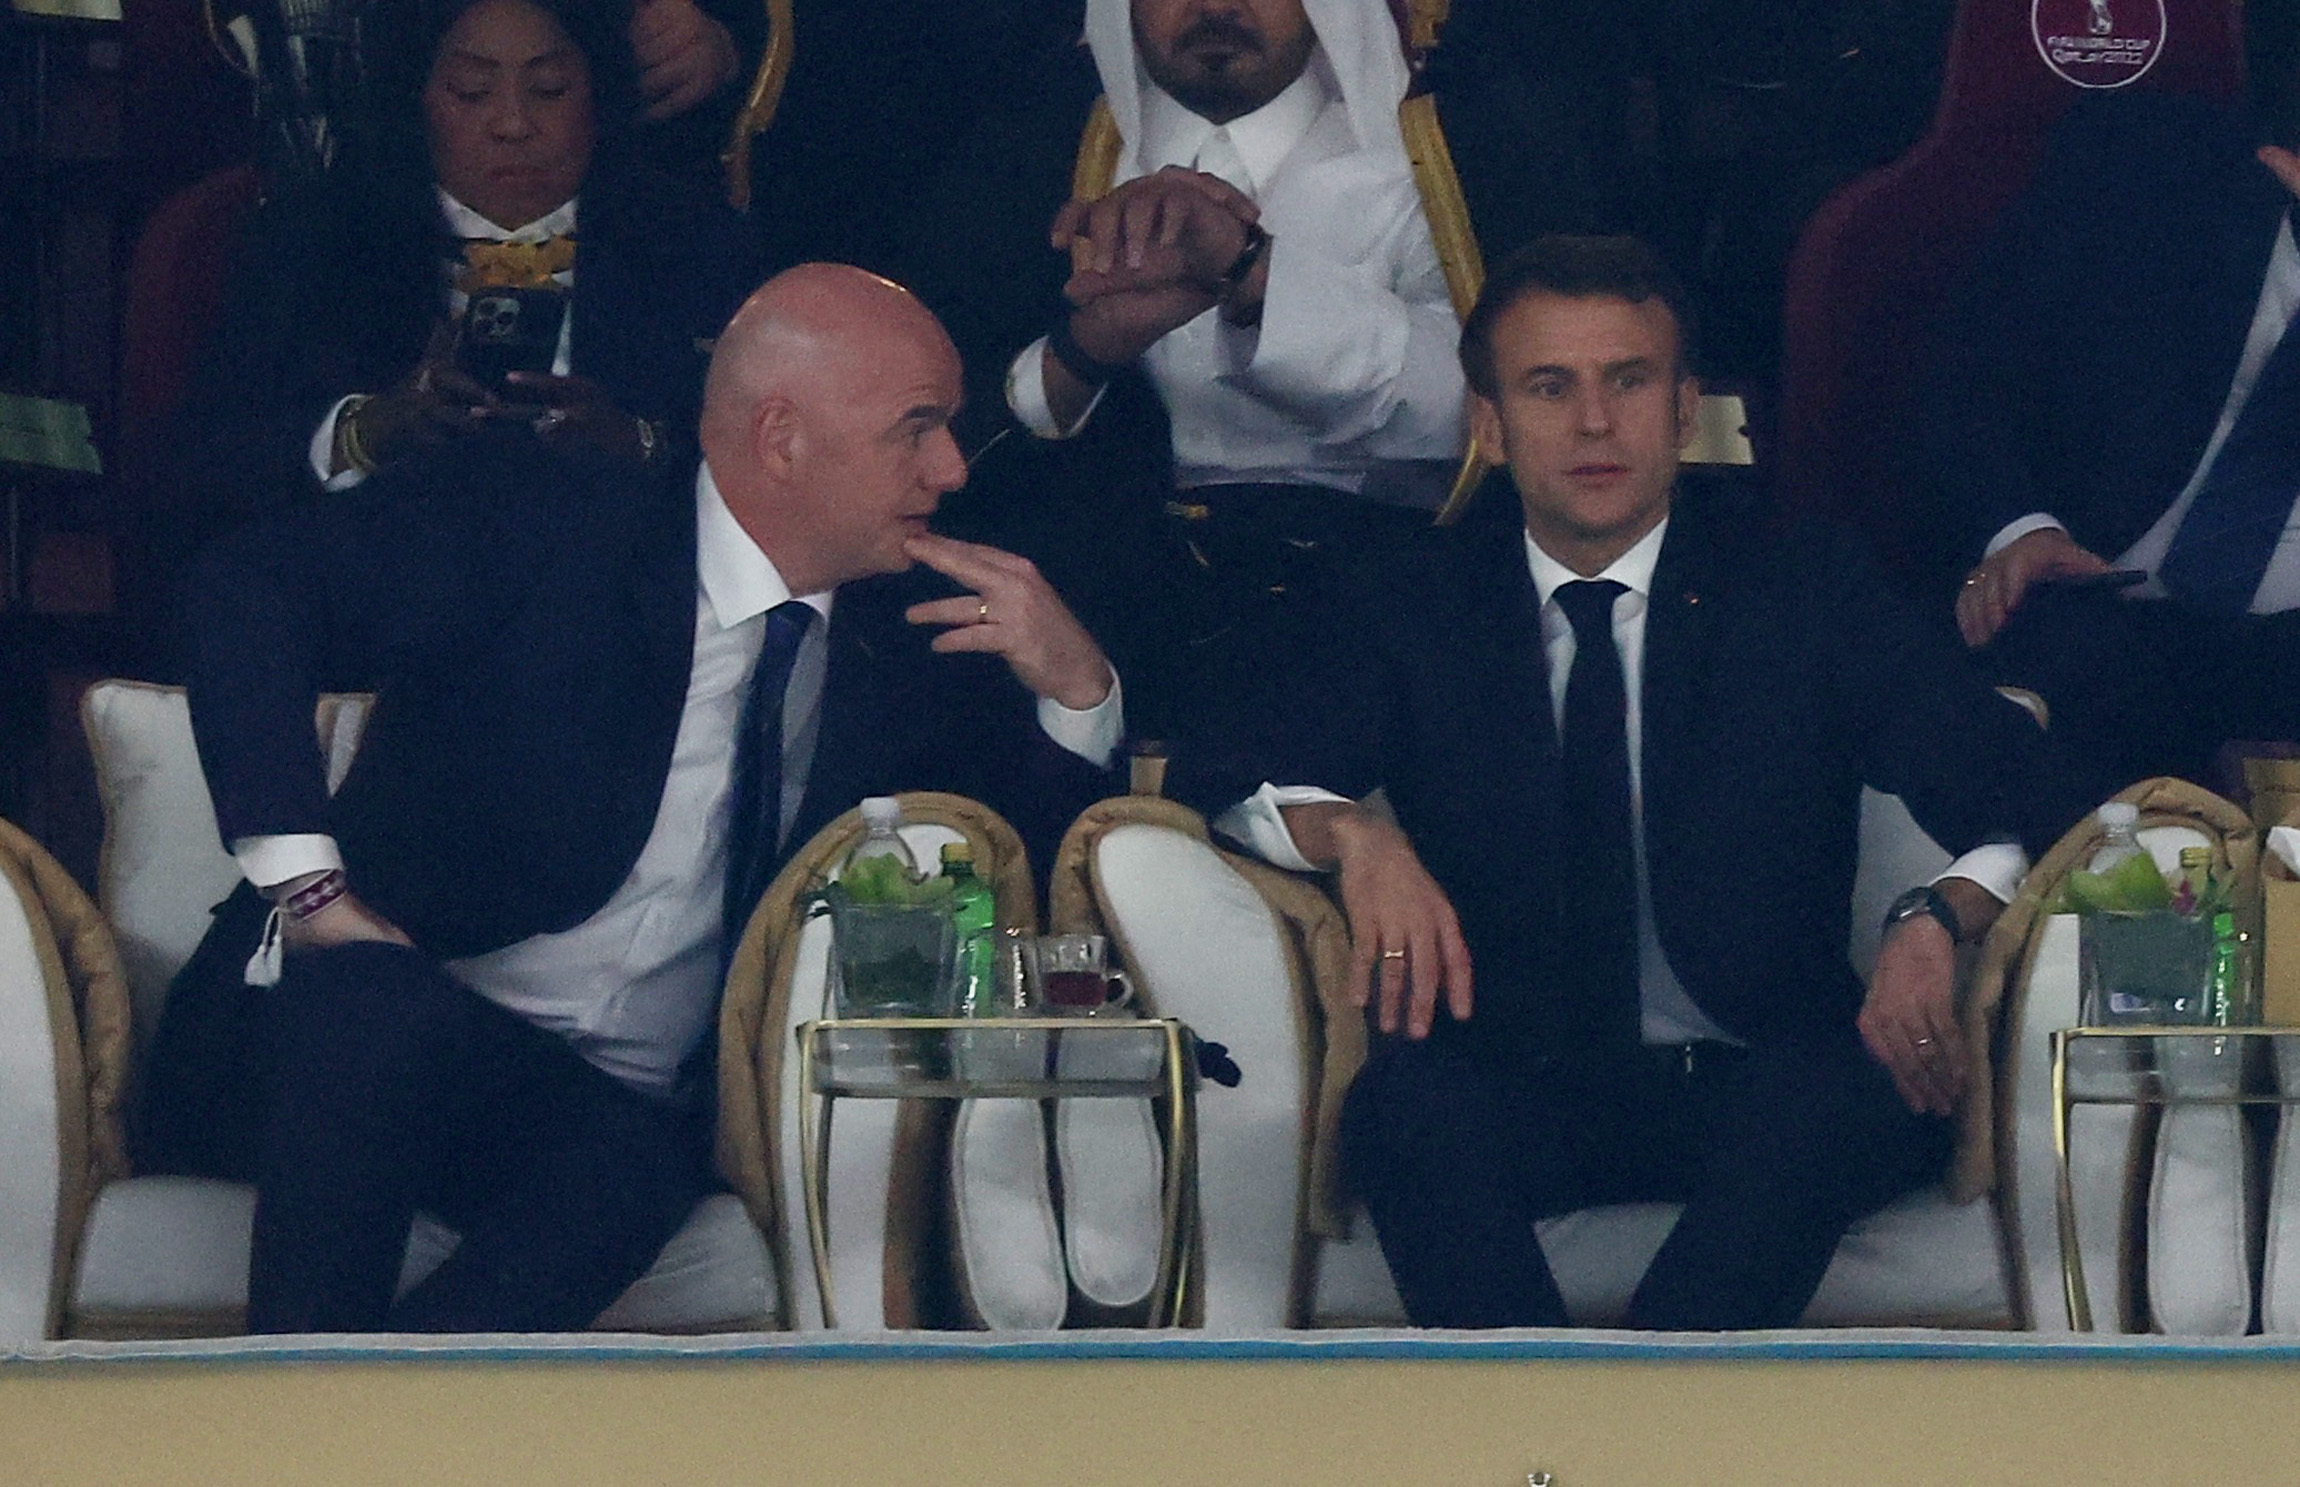 Soccer Football - FIFA World Cup Qatar 2022 - Final - Argentina v France - Lusail Stadium, Lusail, Qatar - December 18, 2022 FIFA president Gianni Infantino and French President Emmanuel Macron are pictured in the stands before the match REUTERS/Lee Smith